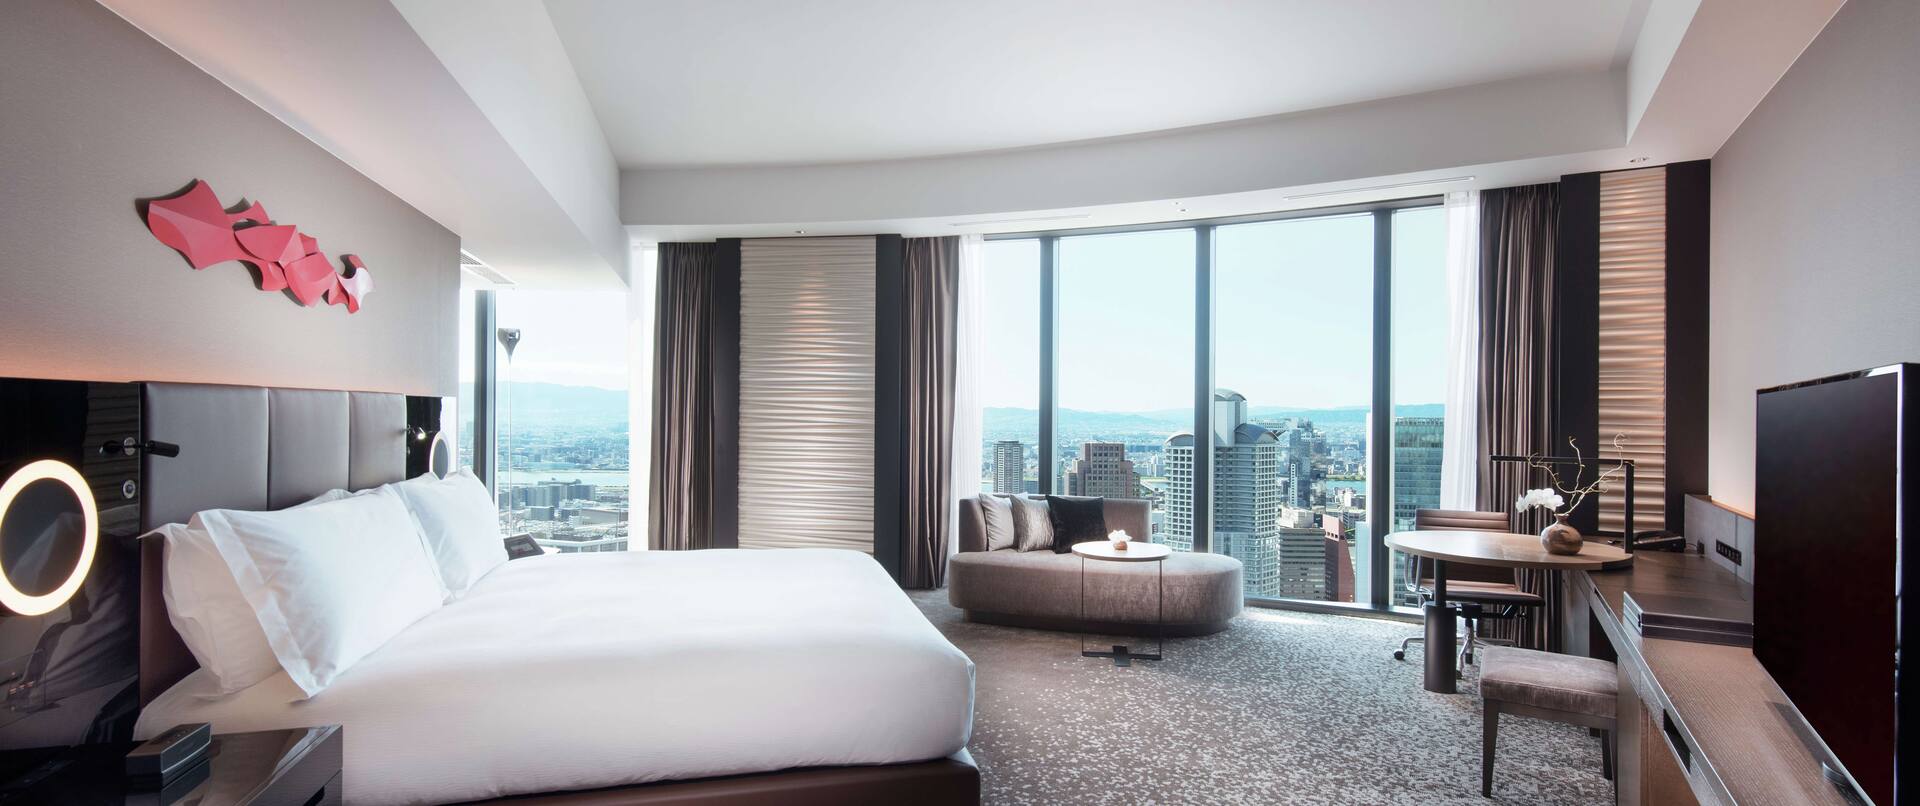 King Bed Executive Room City View